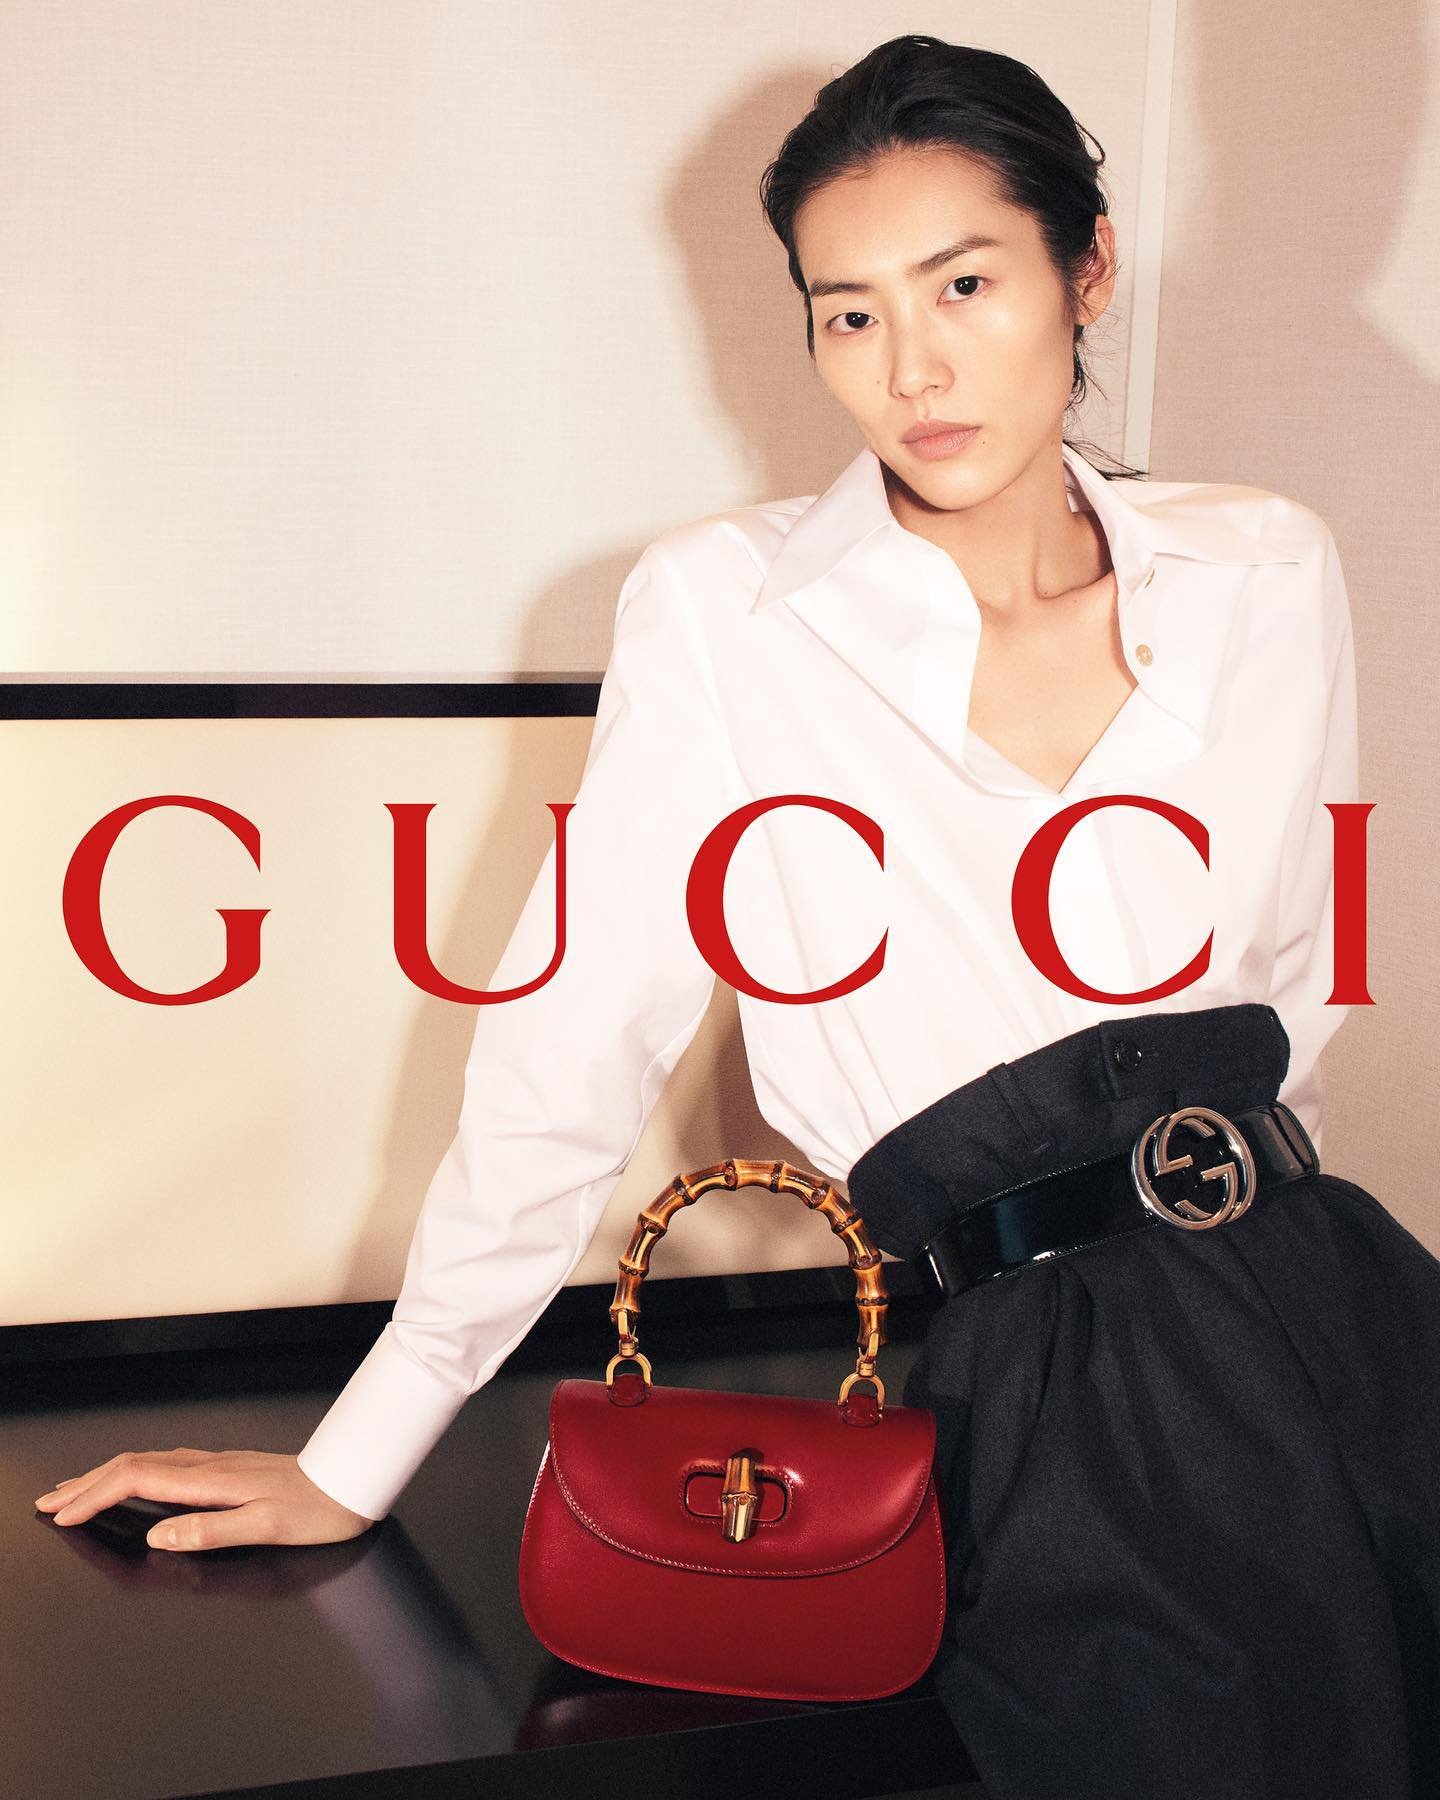 Gucci Diana Bag Honors Her Memory at Gucci Bamboo House in Kyoto